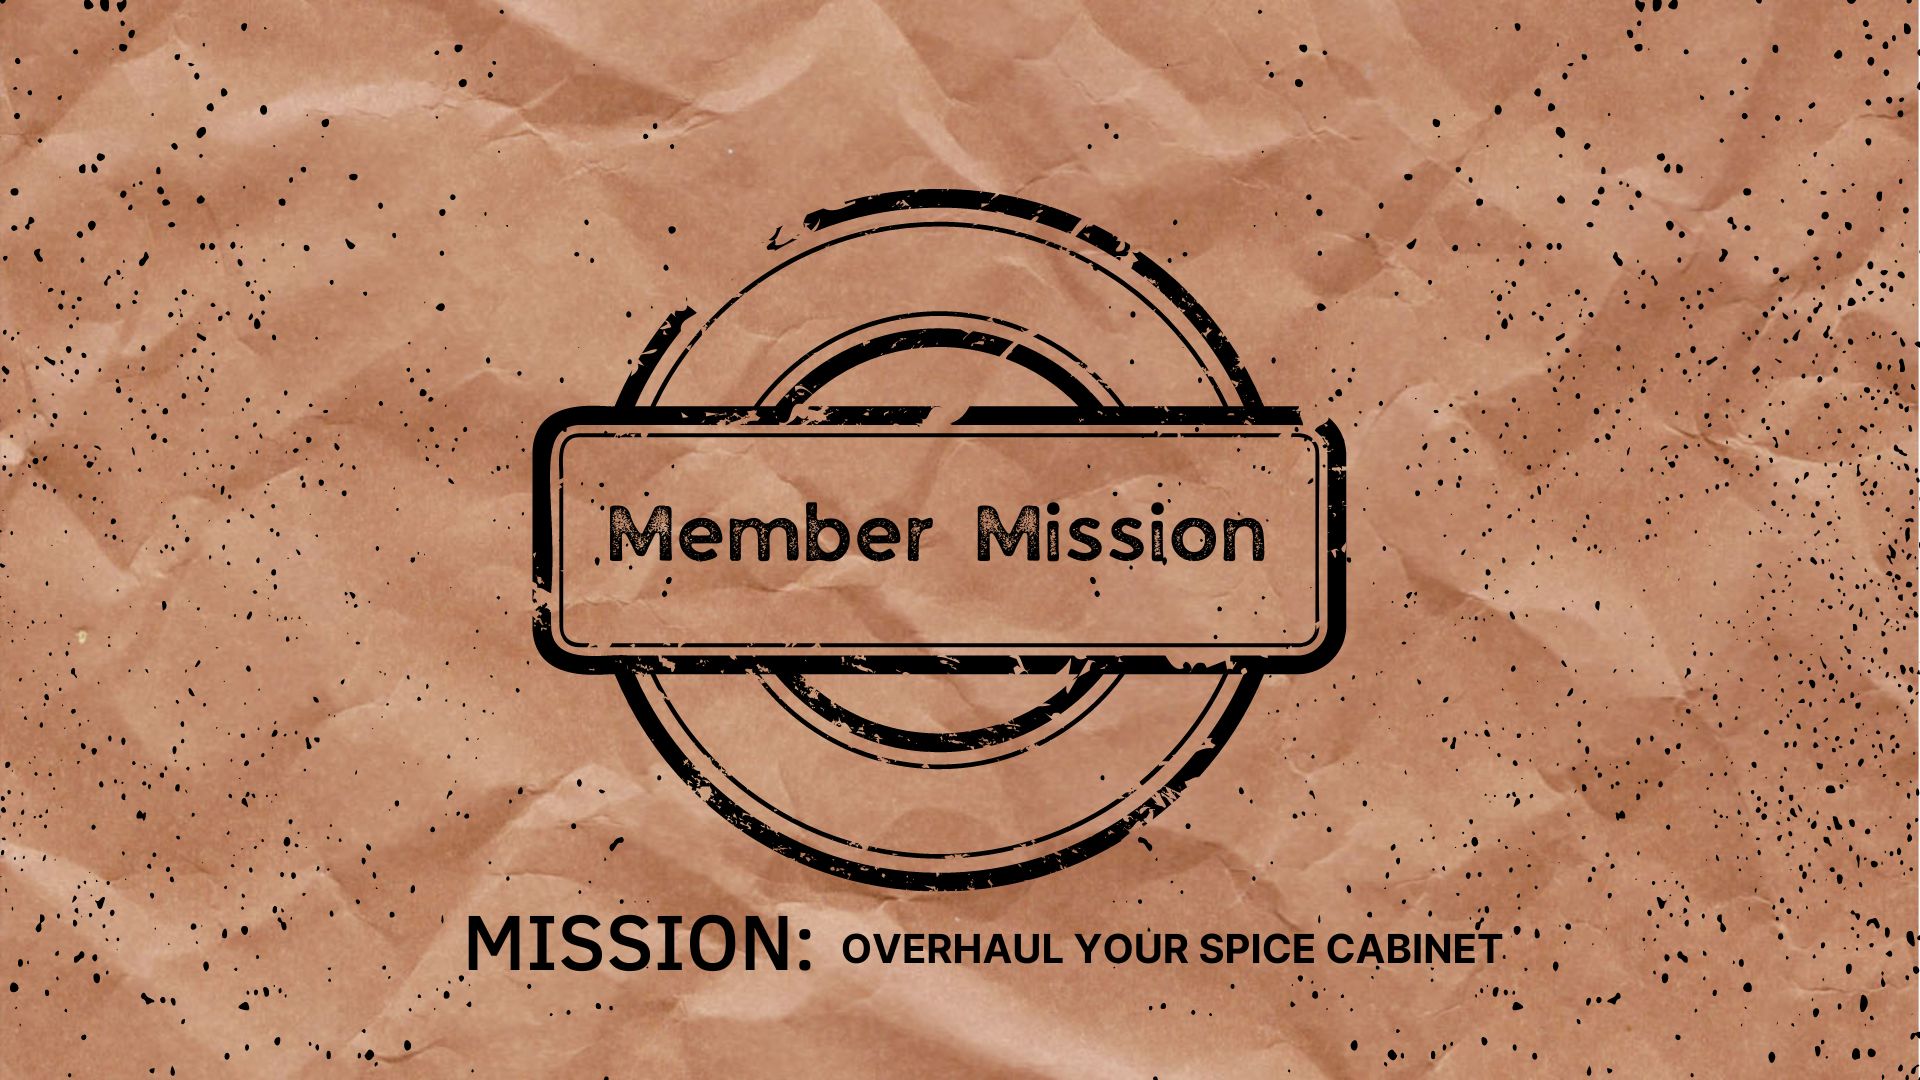 MEMBER MISSION (PAGE) FEB 23